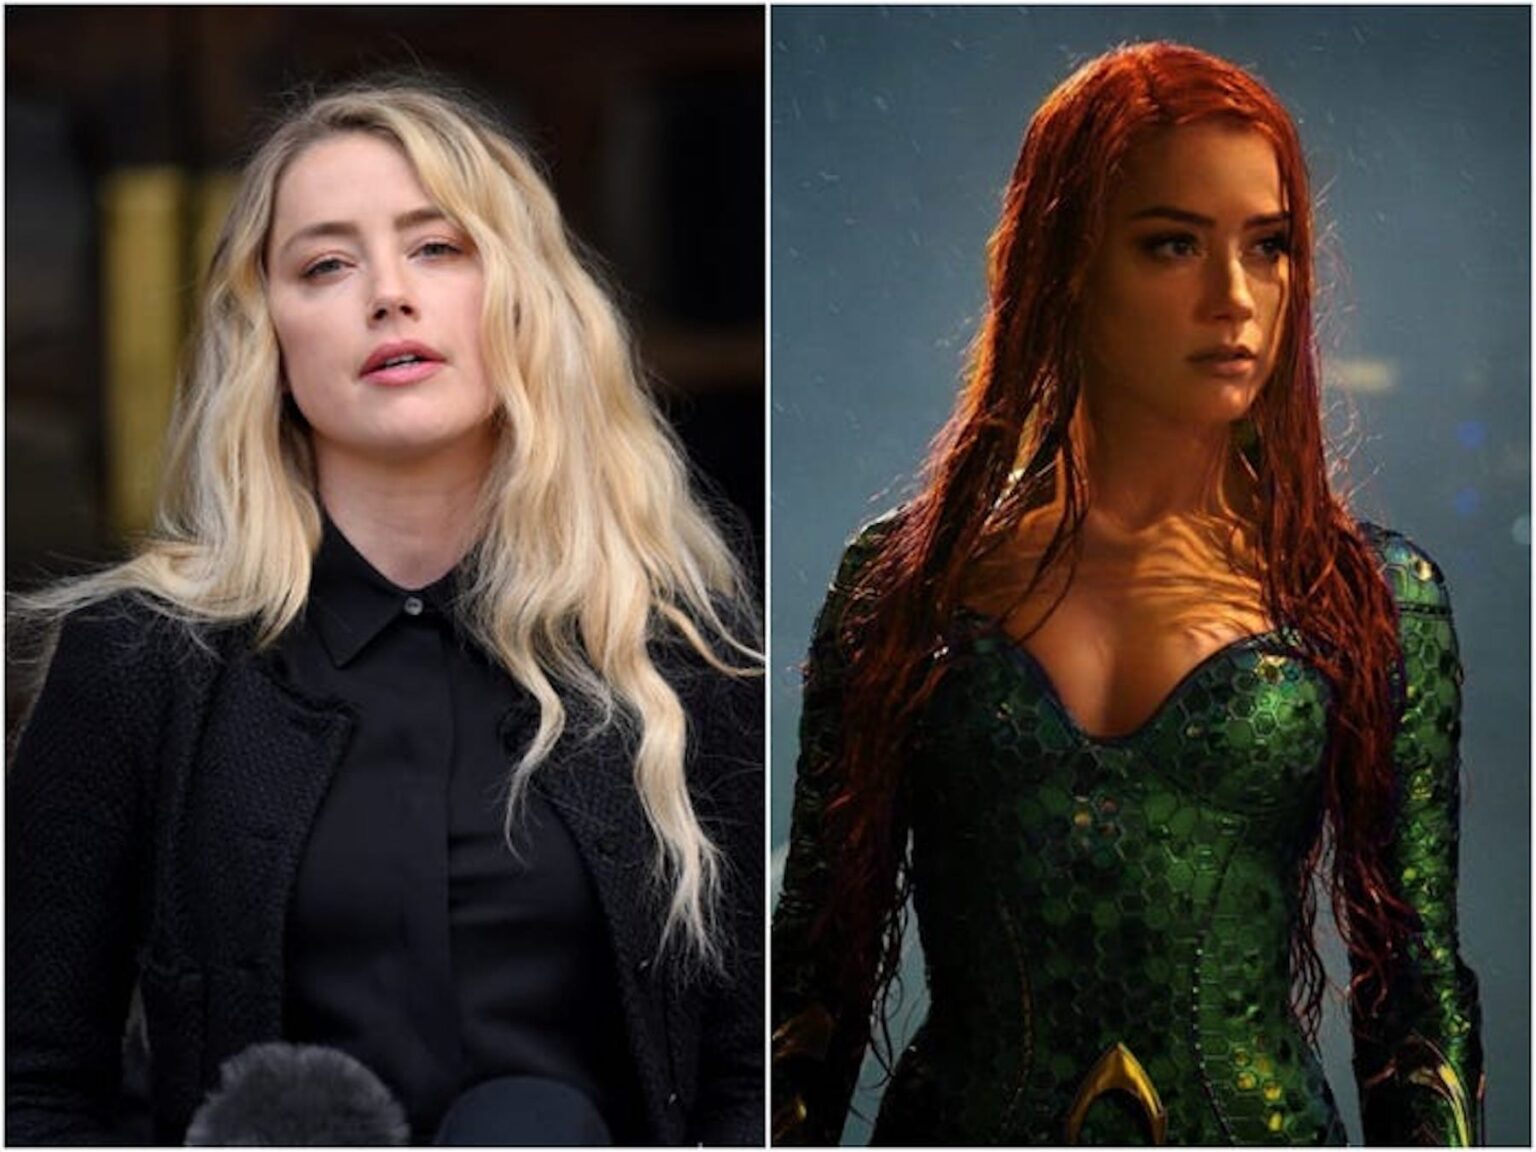 With 'Aquaman 2' filming underway, fans are demanding Amber Heard's removal due to abuse accusations. See what Twitter has to say.